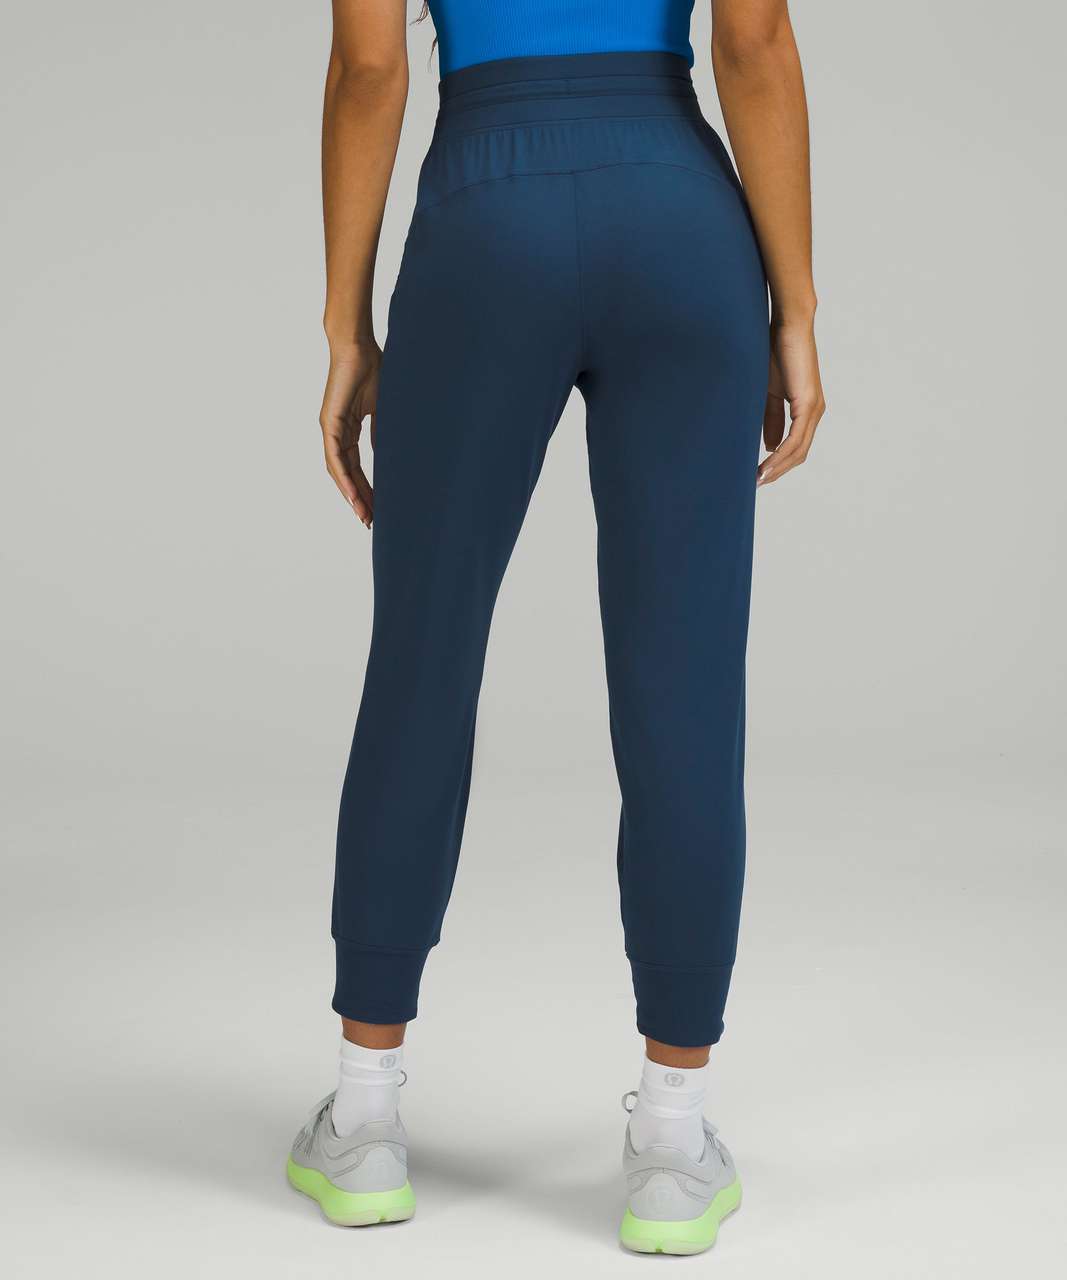 cheap official online shop NWOT Lululemon Ready to Rulu High-Rise Jogger in  Water Drop Blue Women's Size 6